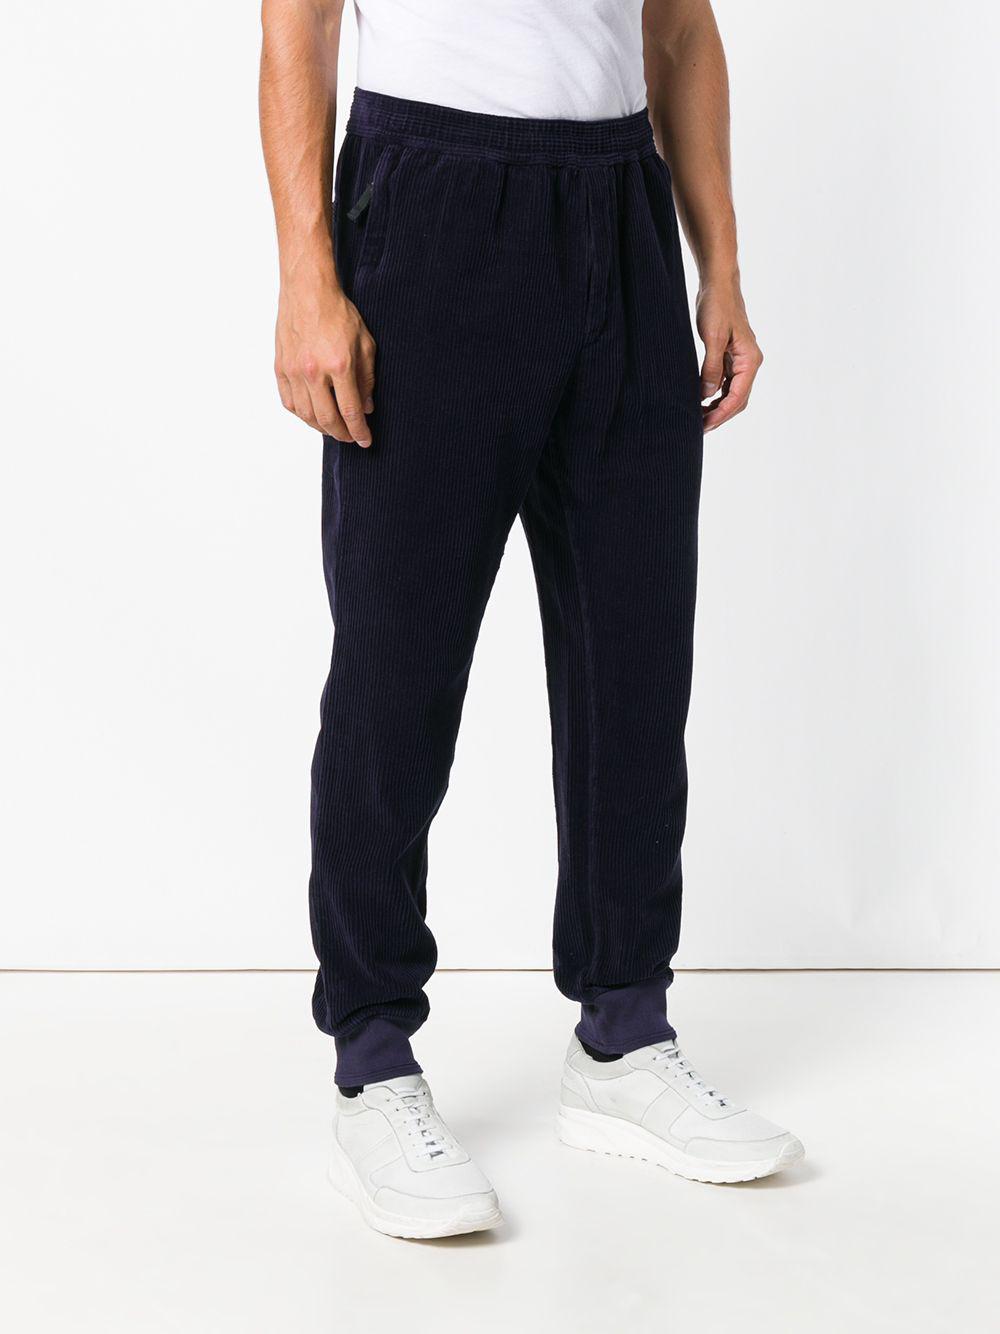 Stone Island Tapered Corduroy Trousers in Blue for Men - Lyst